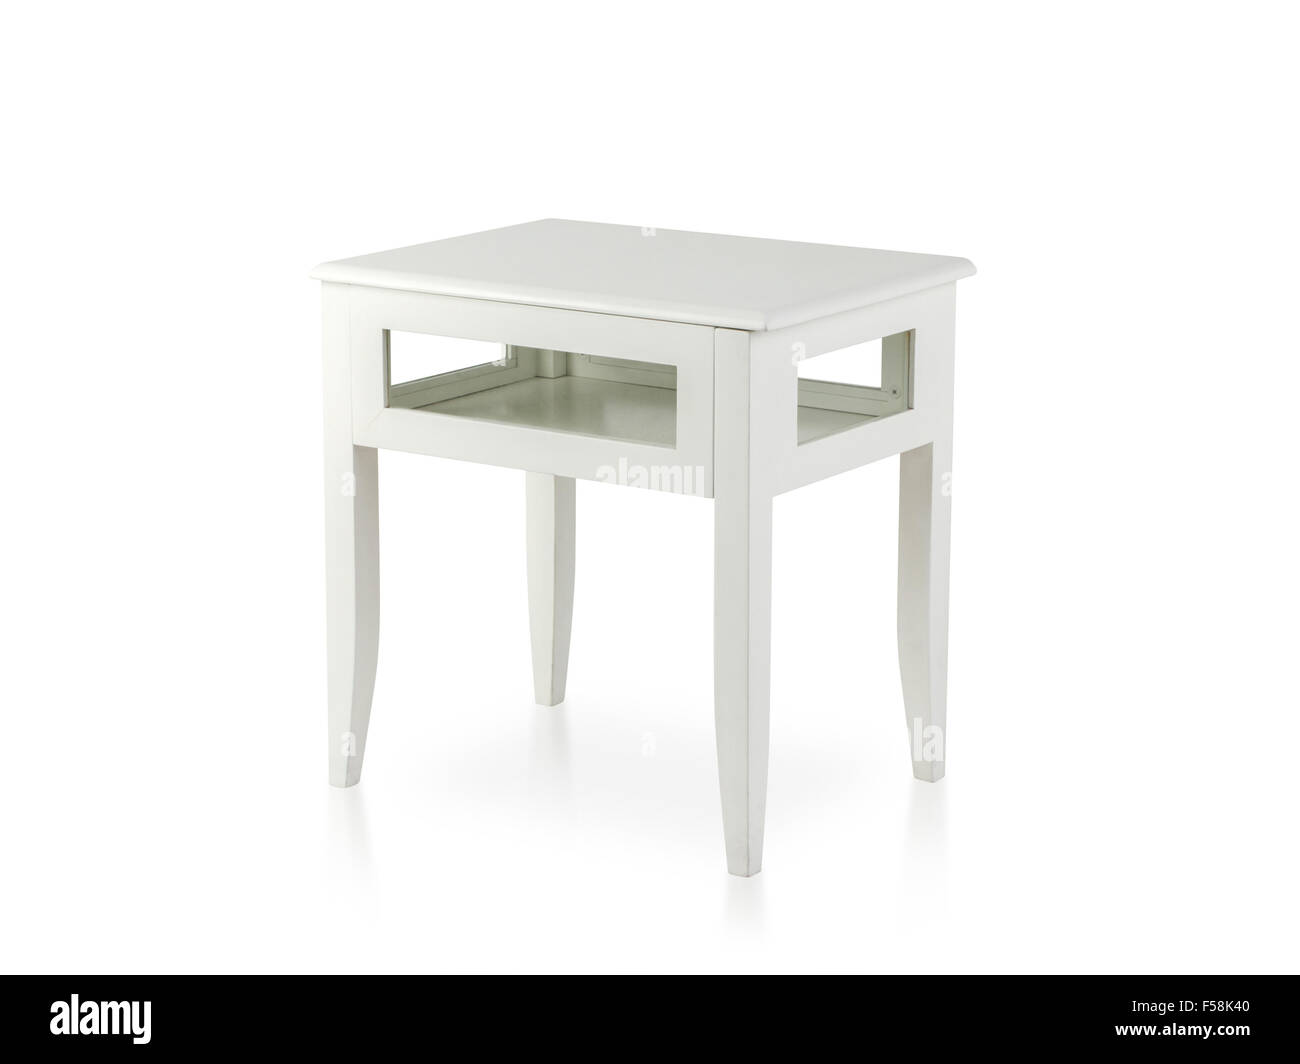 Table en bois blanc isolated on white Banque D'Images